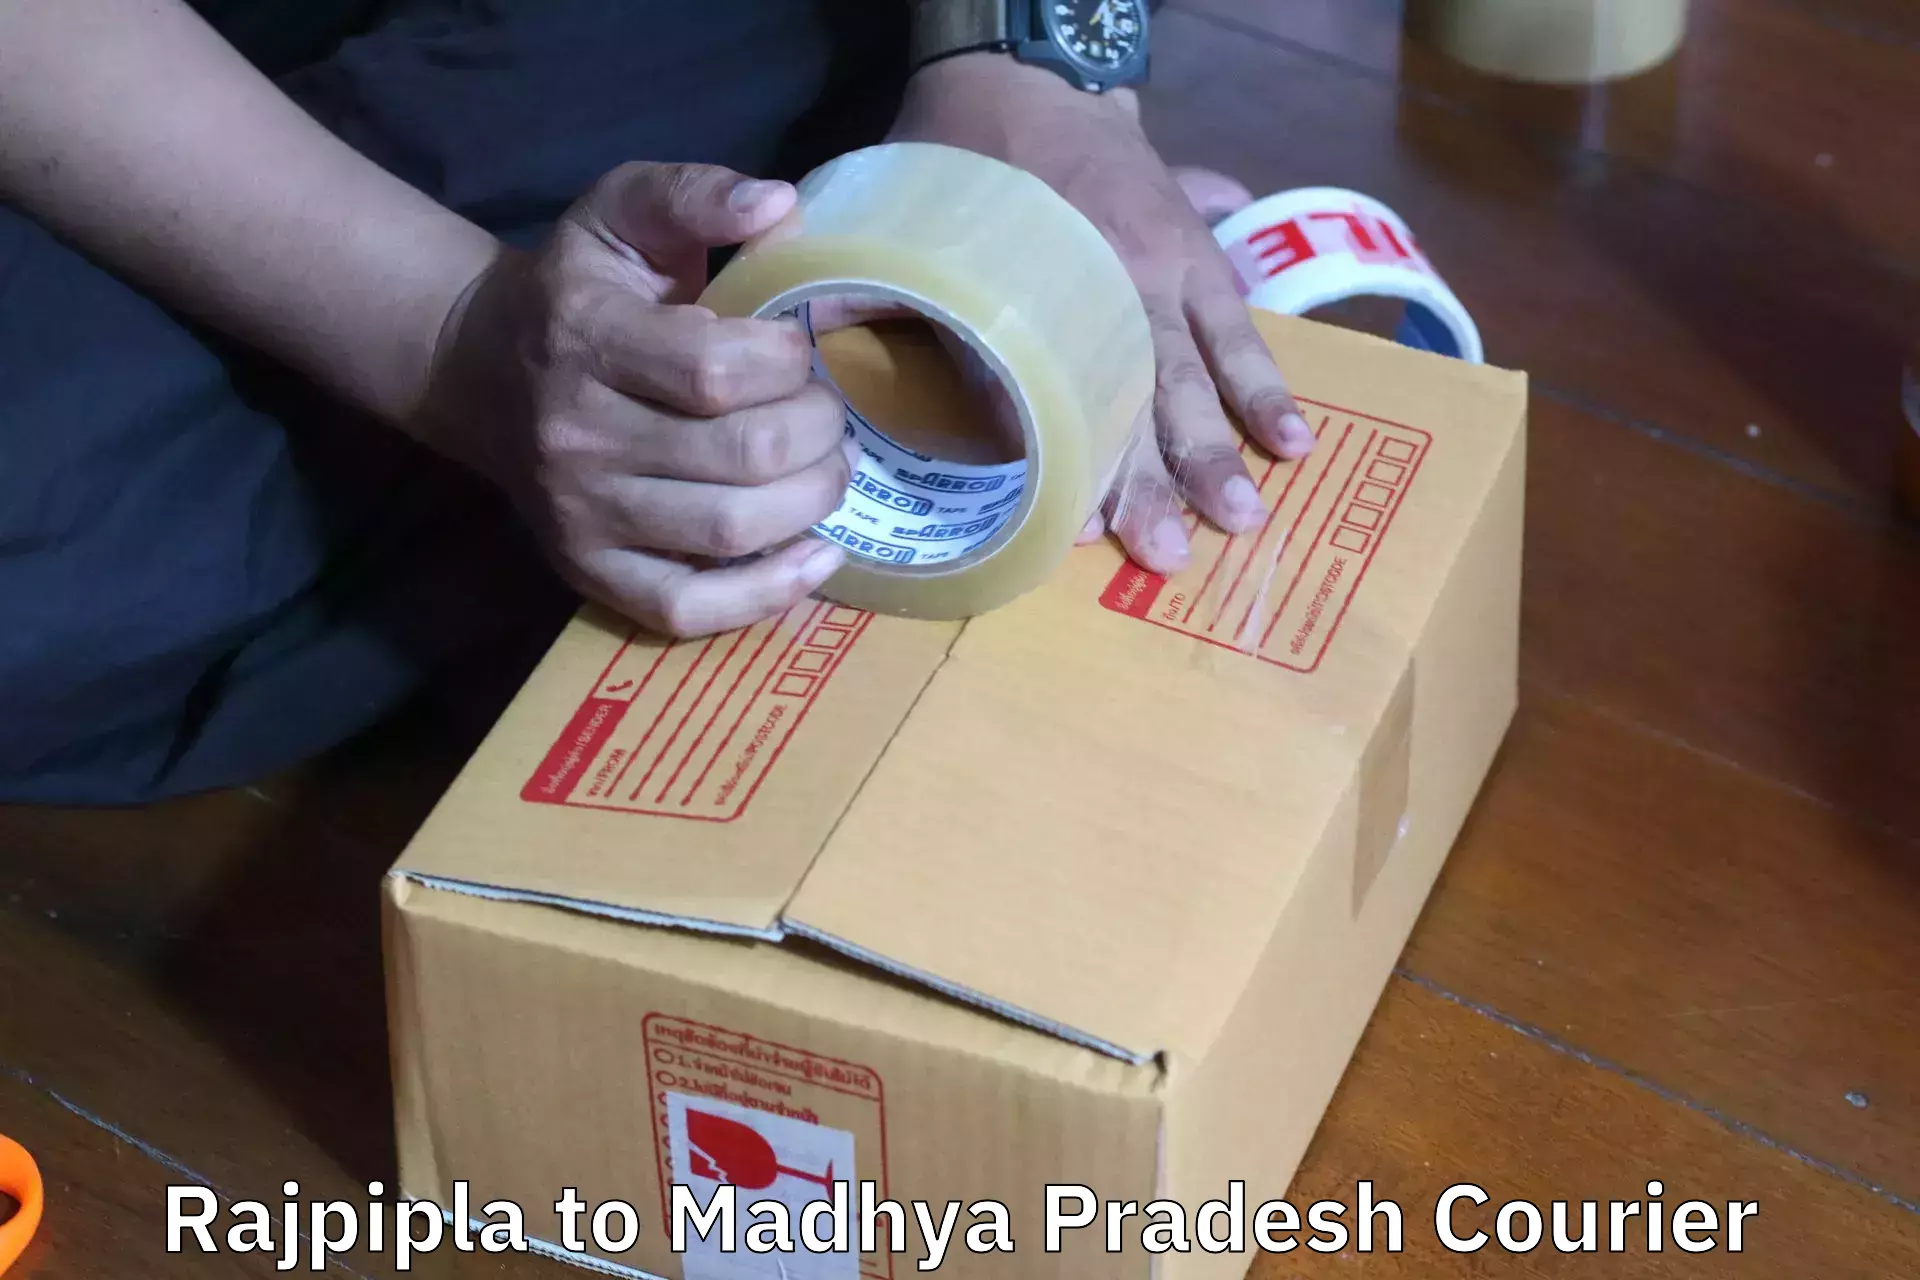 Budget-friendly movers Rajpipla to Indore